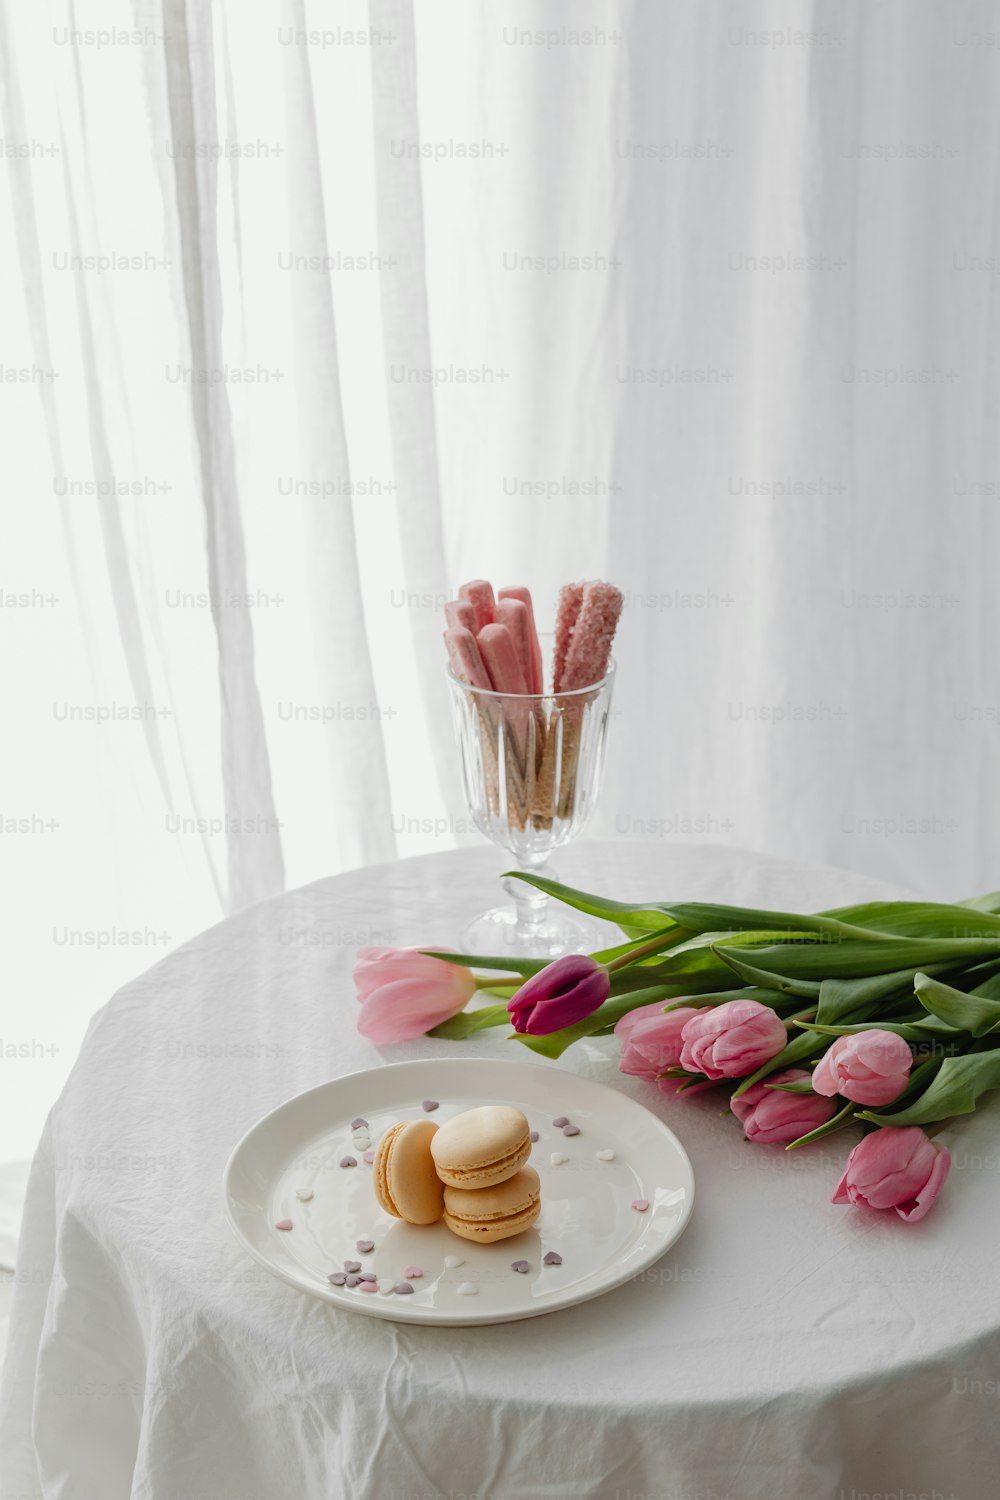 a plate of cookies and pink tulips on a table